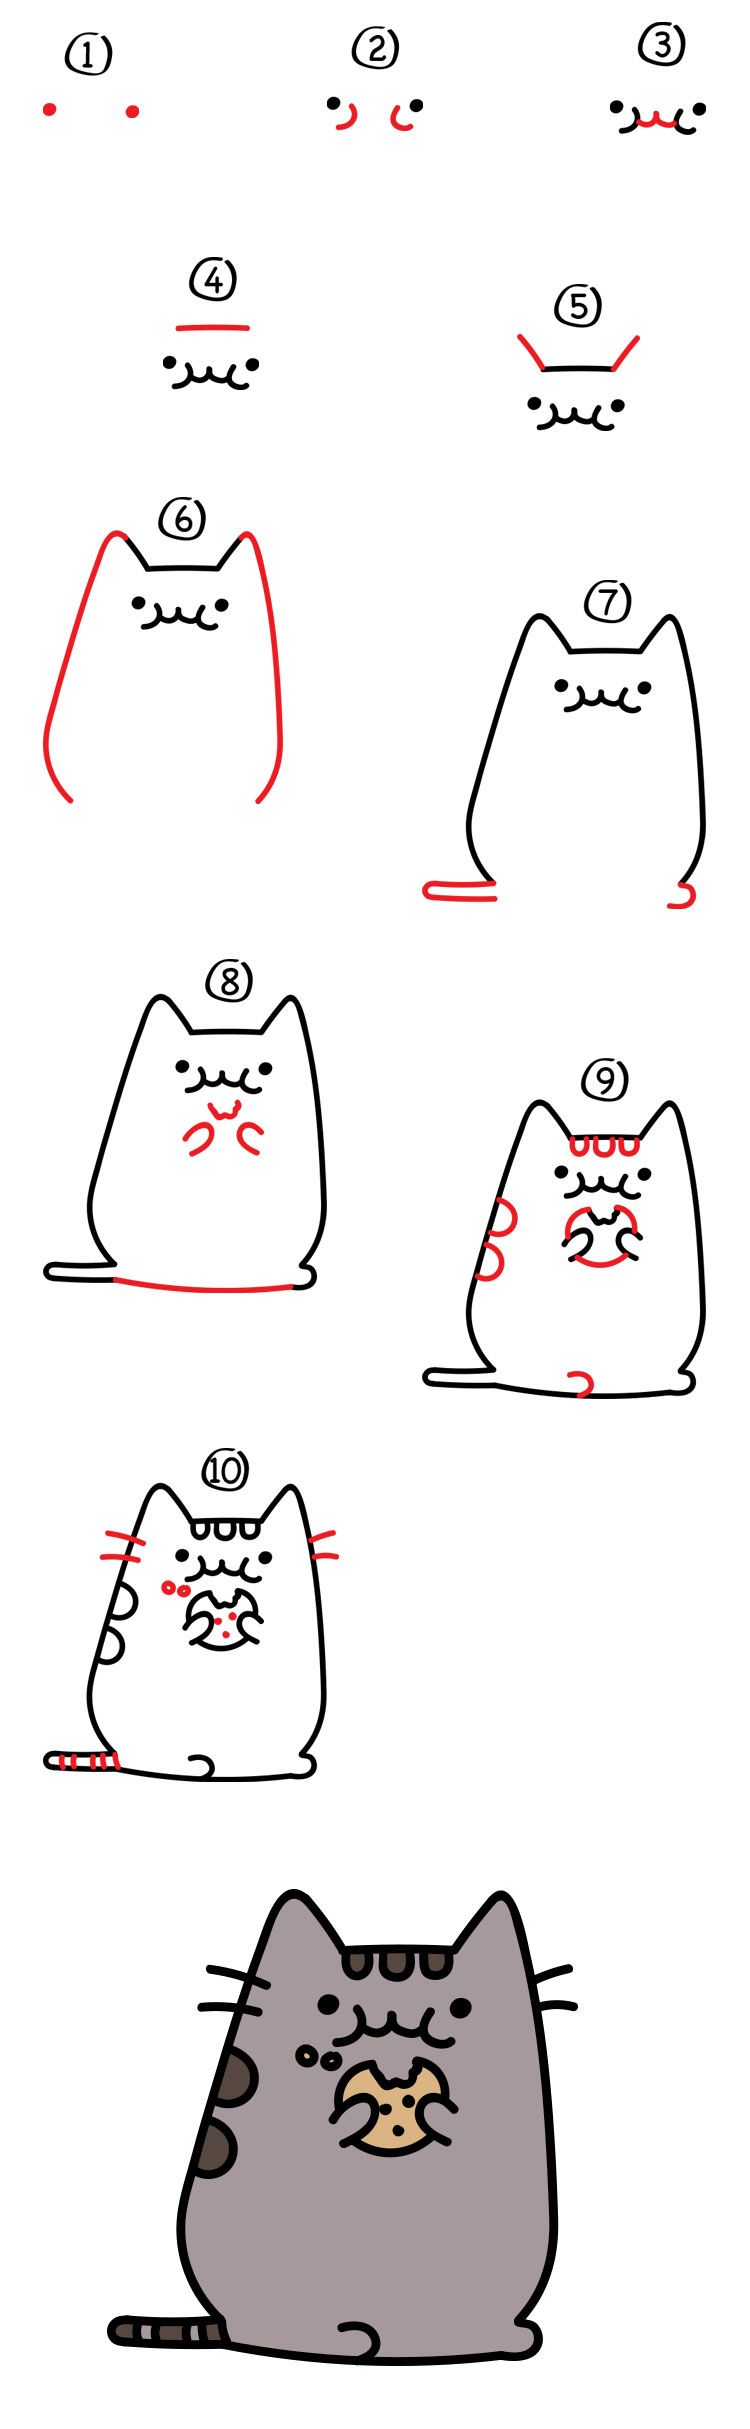 How To Draw The Pusheen Cat Eating A Cookie Giveaway Art For